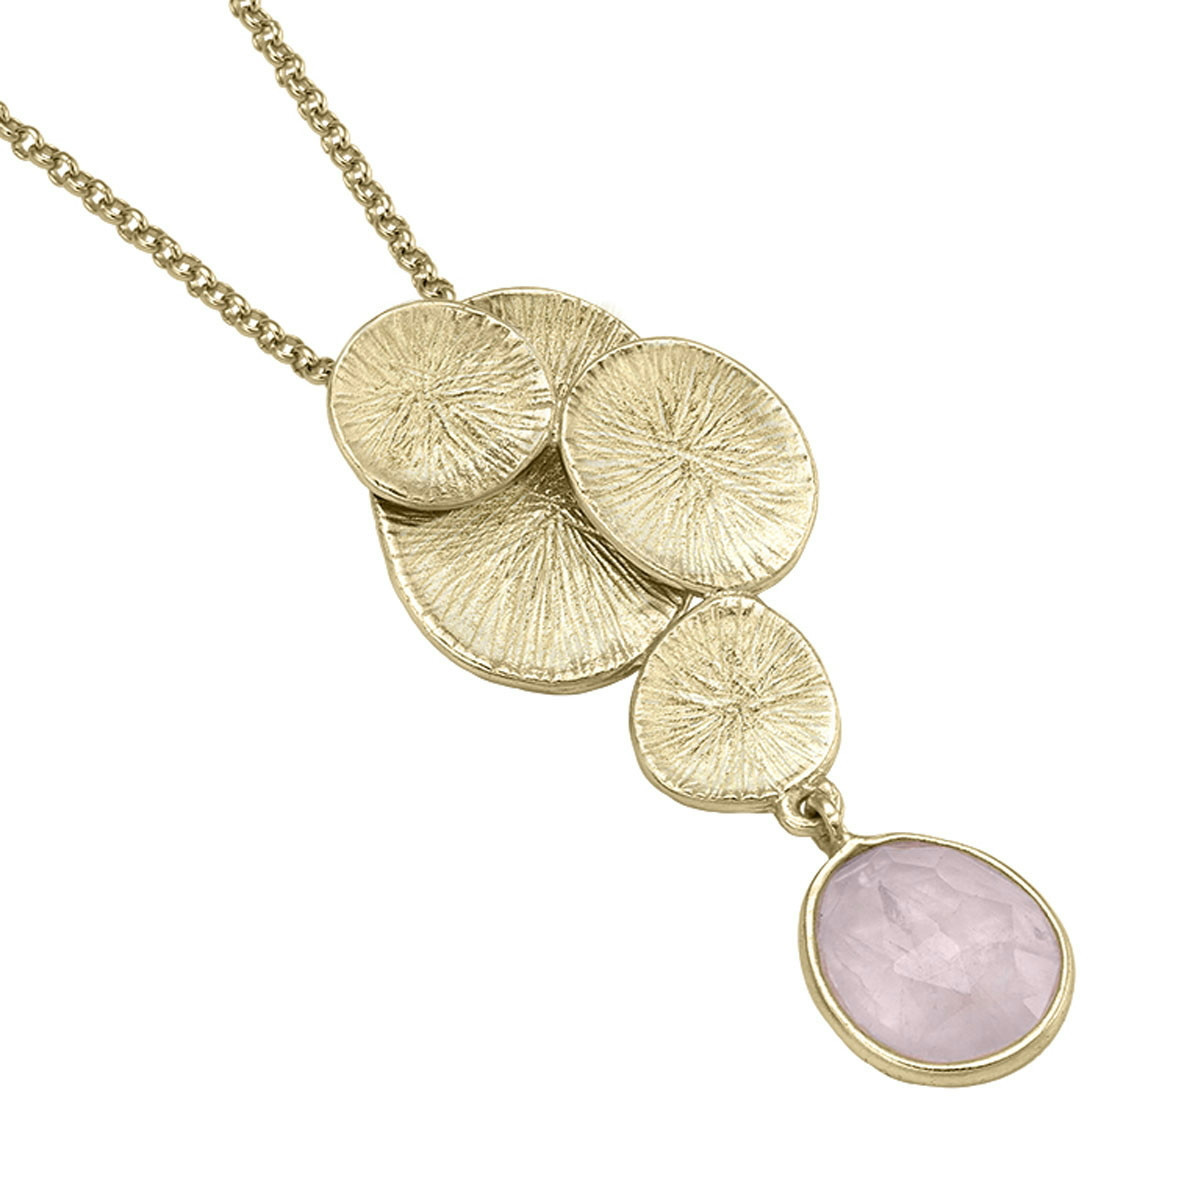 LILY Pendant in Silver with Rose Quartz. 18k Gold Vermeil